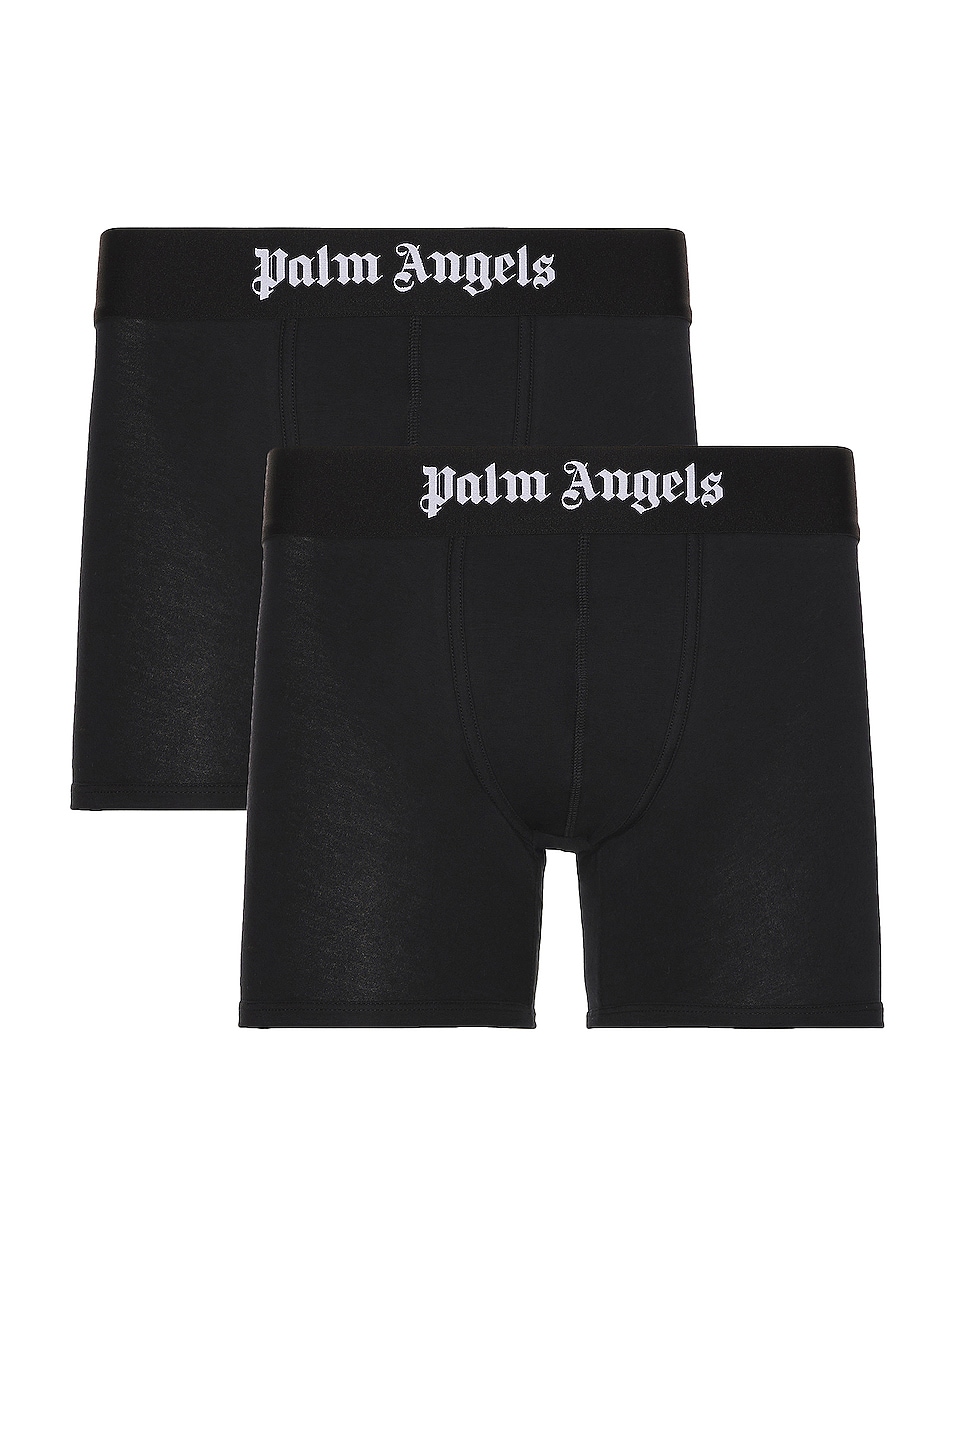 Image 1 of Palm Angels Boxer Bipack in Black & White